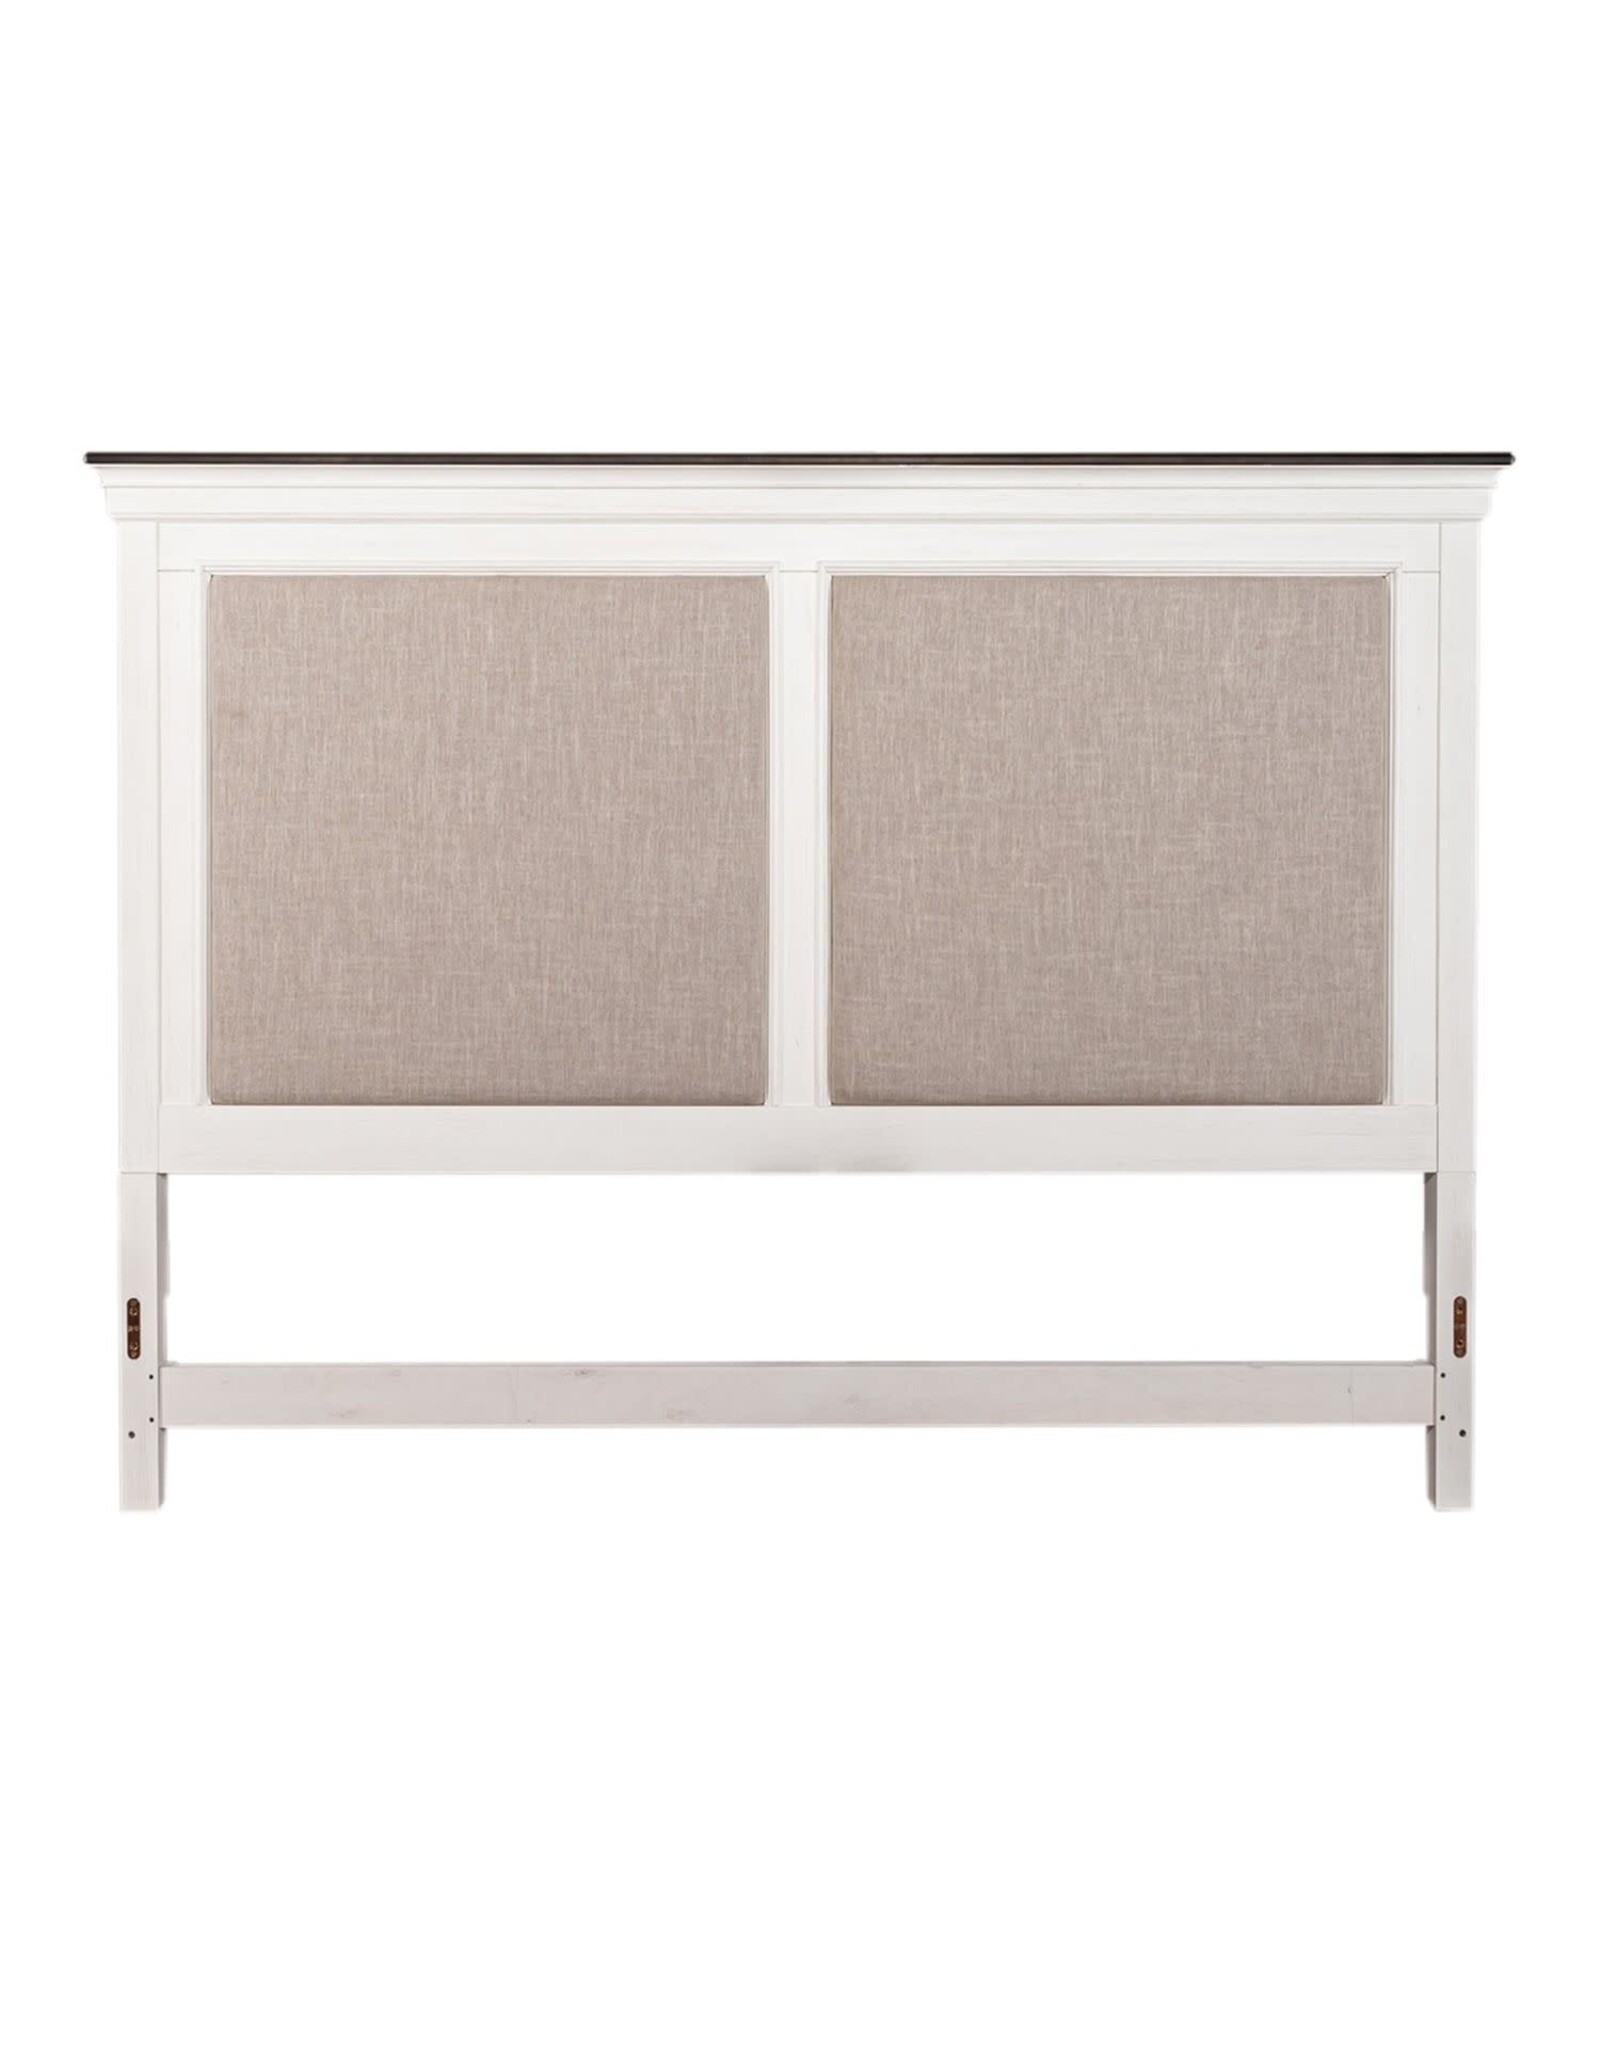 417-BR13H Queen Arched Panel Headboard